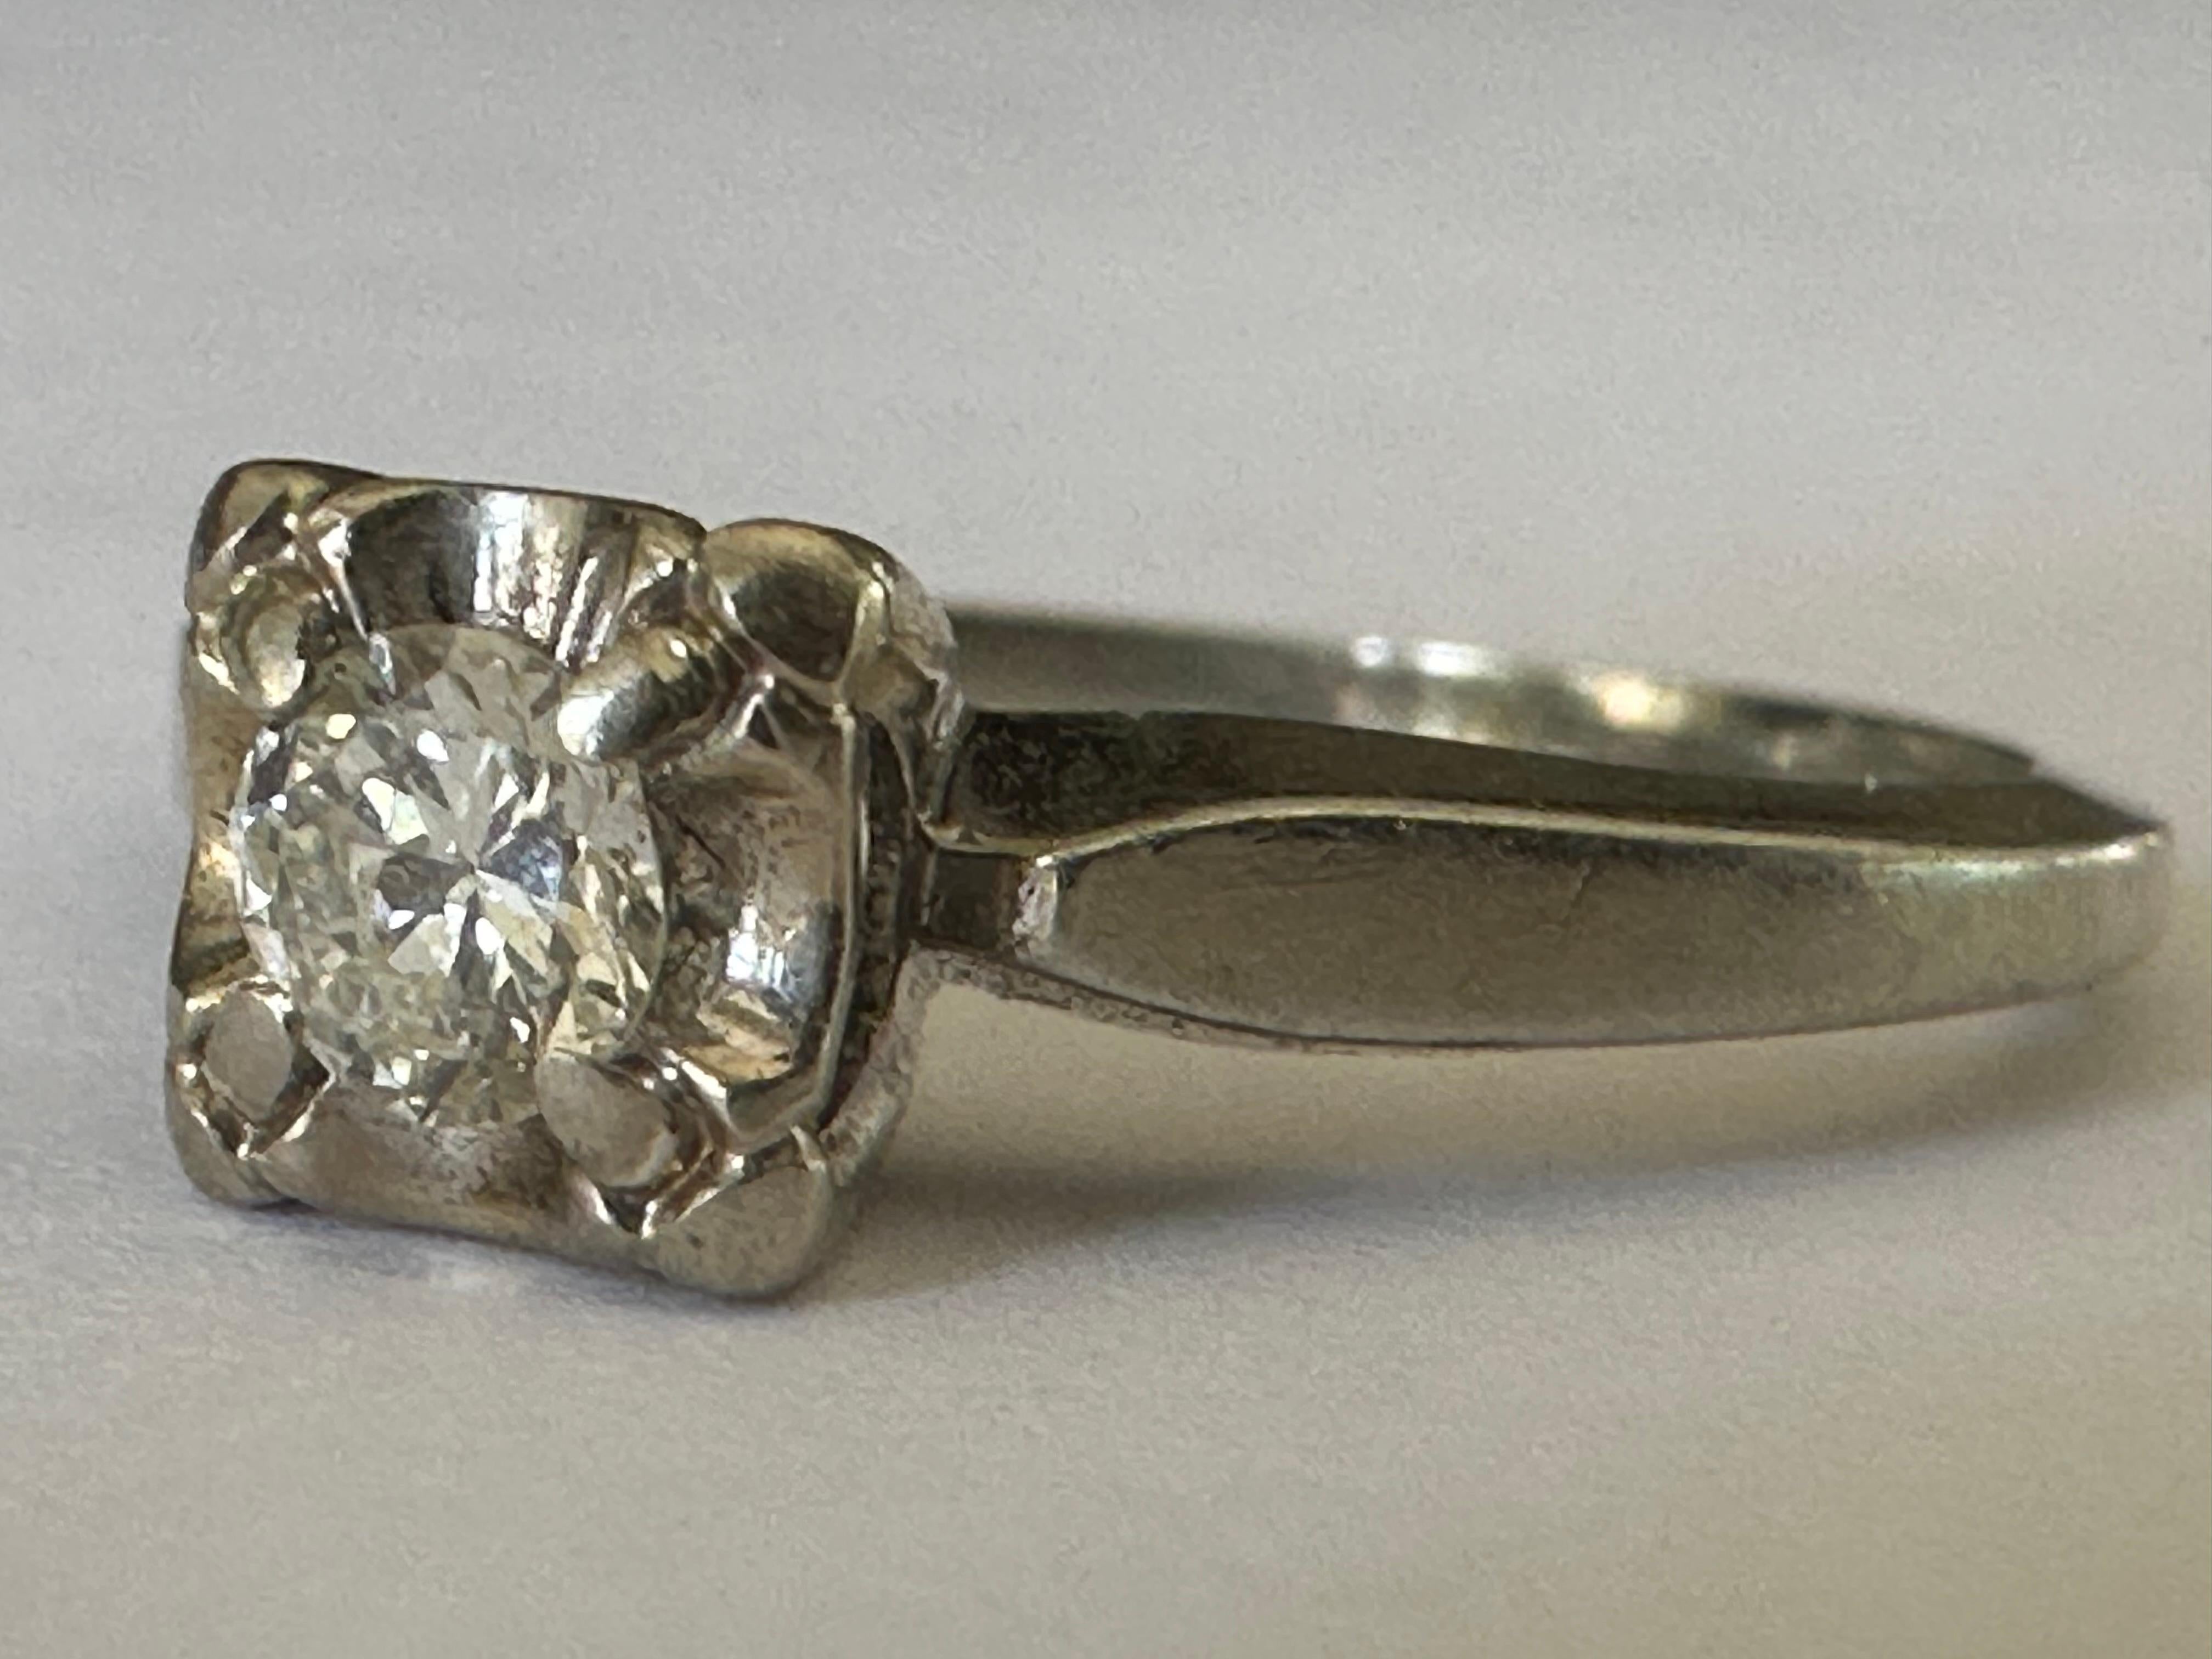 An Old European-cut diamond measuring approximately 0.20 carat, J color VS clarity, shines at the center of this classic, mid-century solitaire engagement ring crafted in 18K white gold. Circa 1940s.
